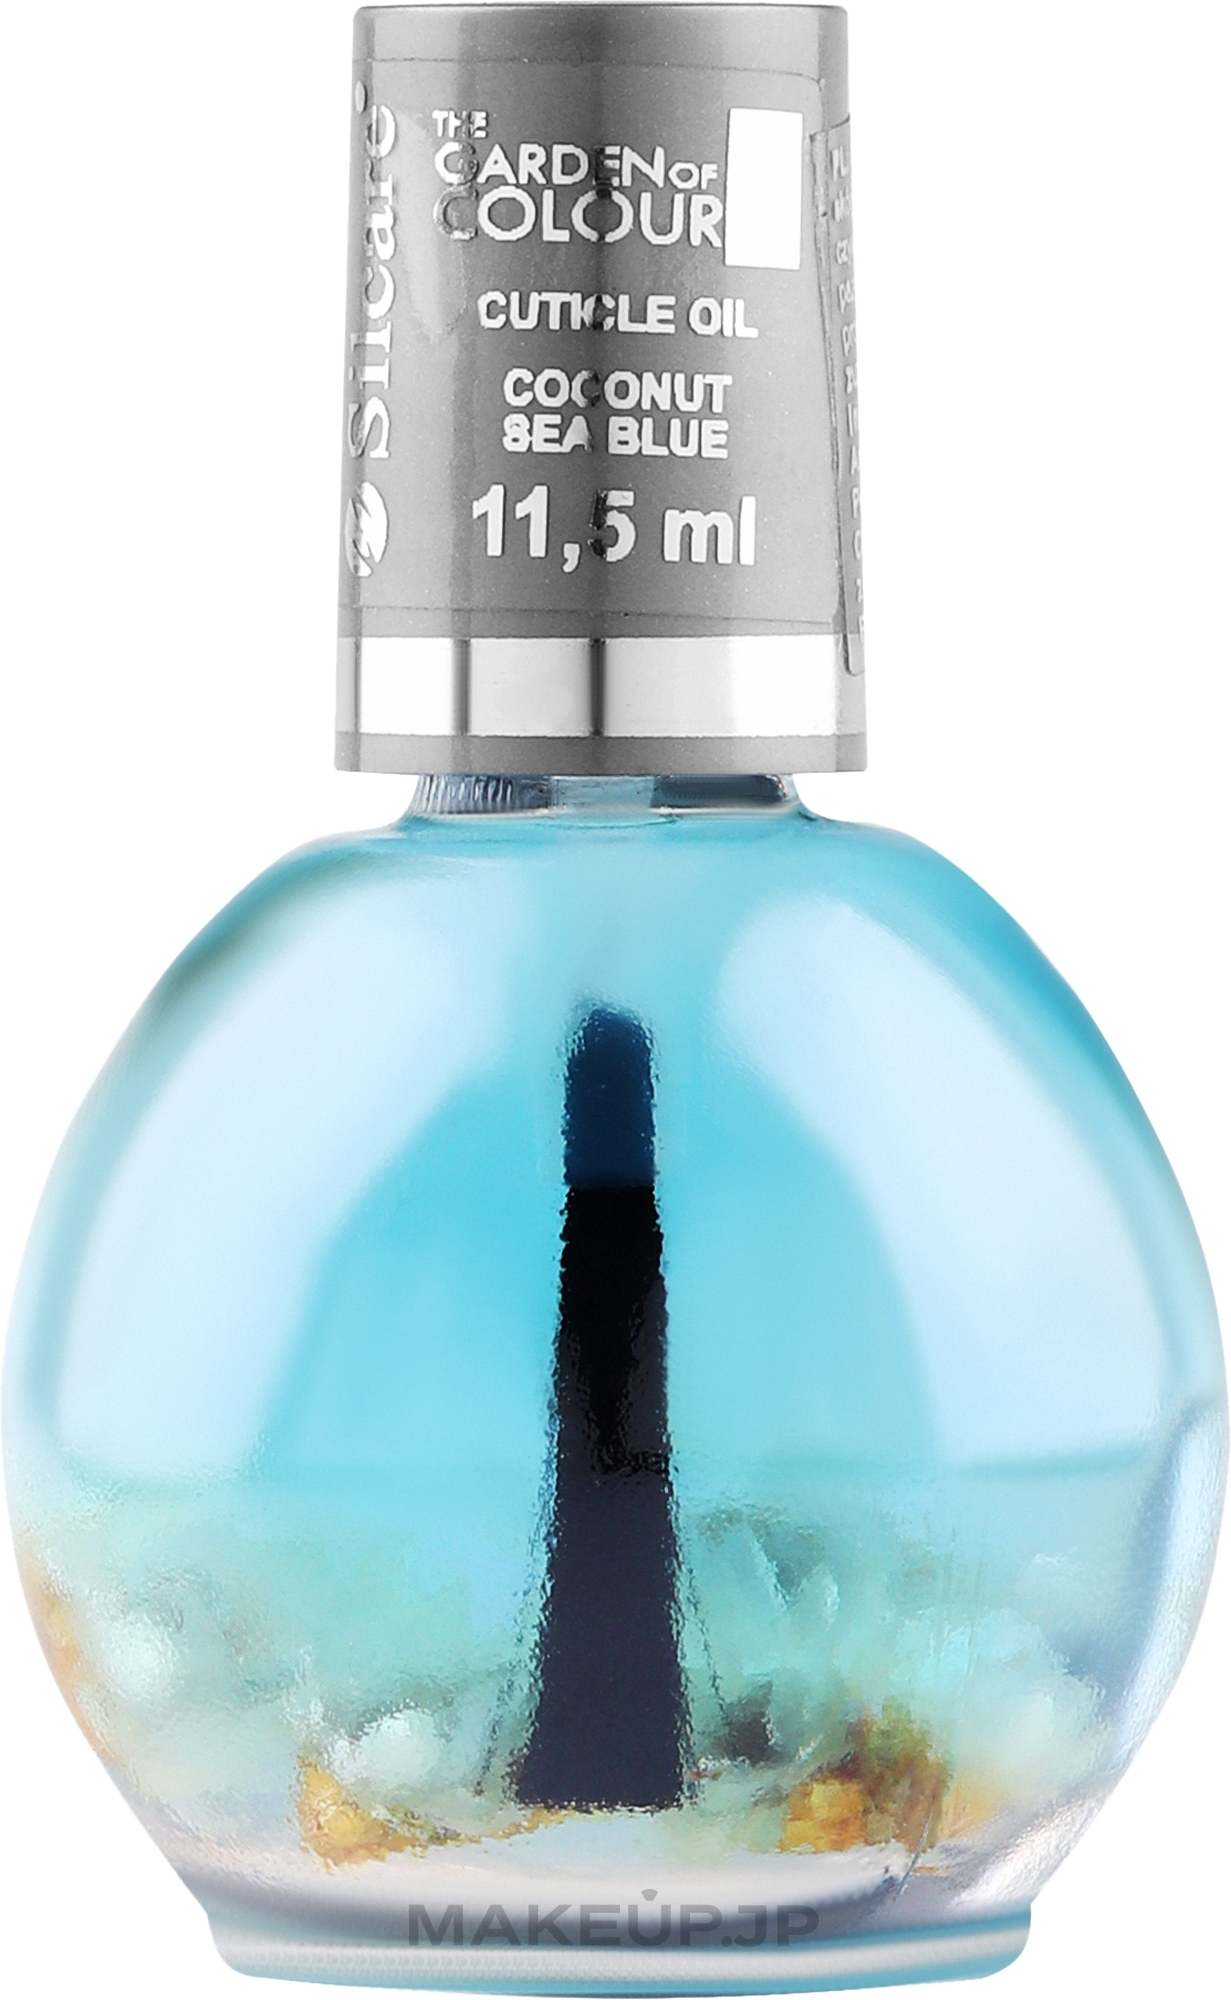 Nail & Cuticle Oil with Flowers - Silcare Cuticle Oil Coconut Sea Blue — photo 11.5 ml